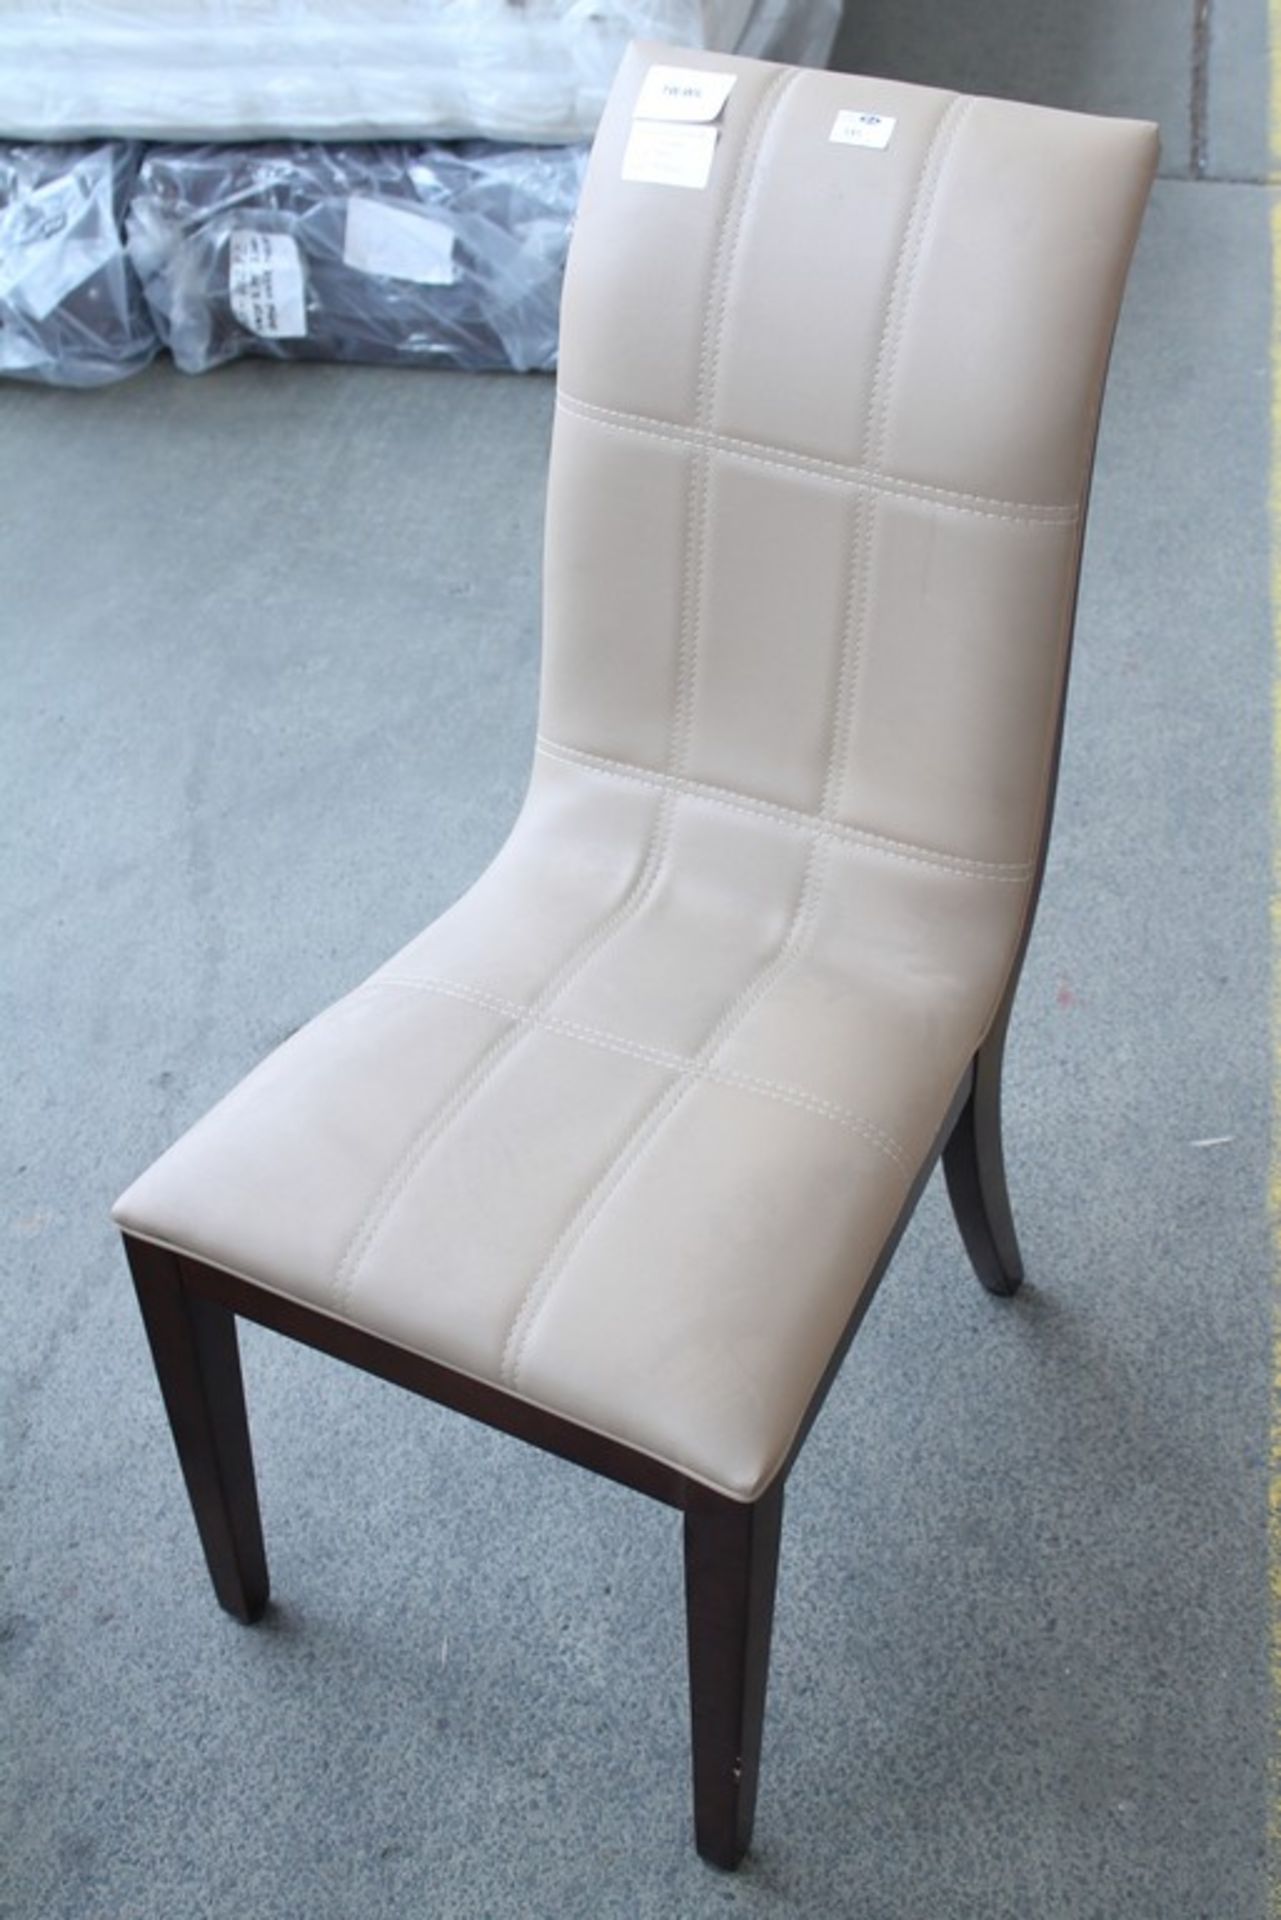 1 x MARCIELLO DINING CHAIR RRP £170  *PLEASE NOTE THAT THE BID PRICE IS MULTIPLIED BY THE NUMBER